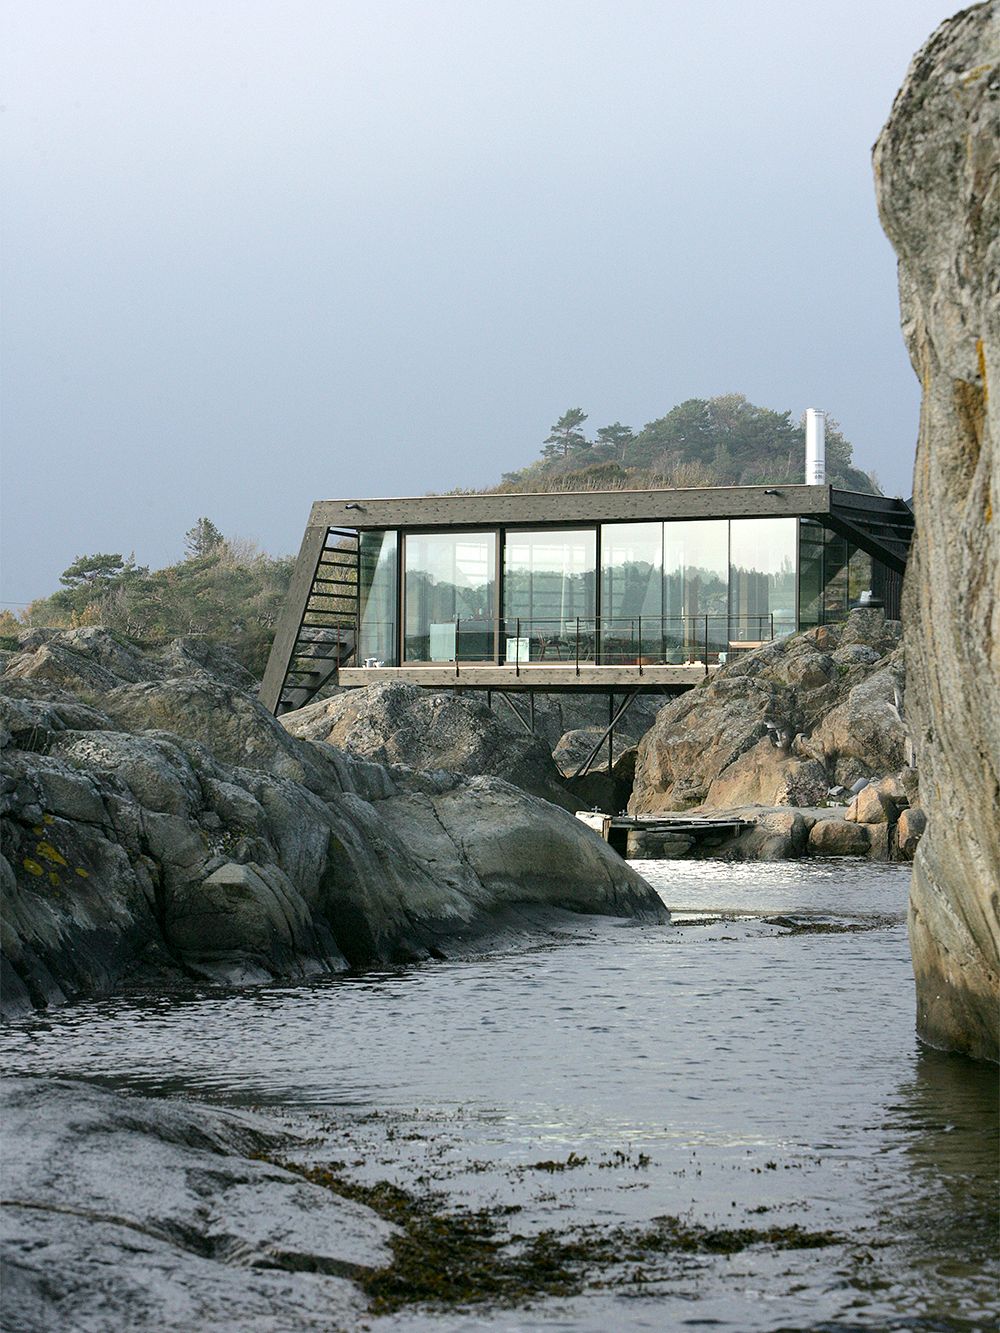 An image of Lille Arøya, a summer home in Norway.